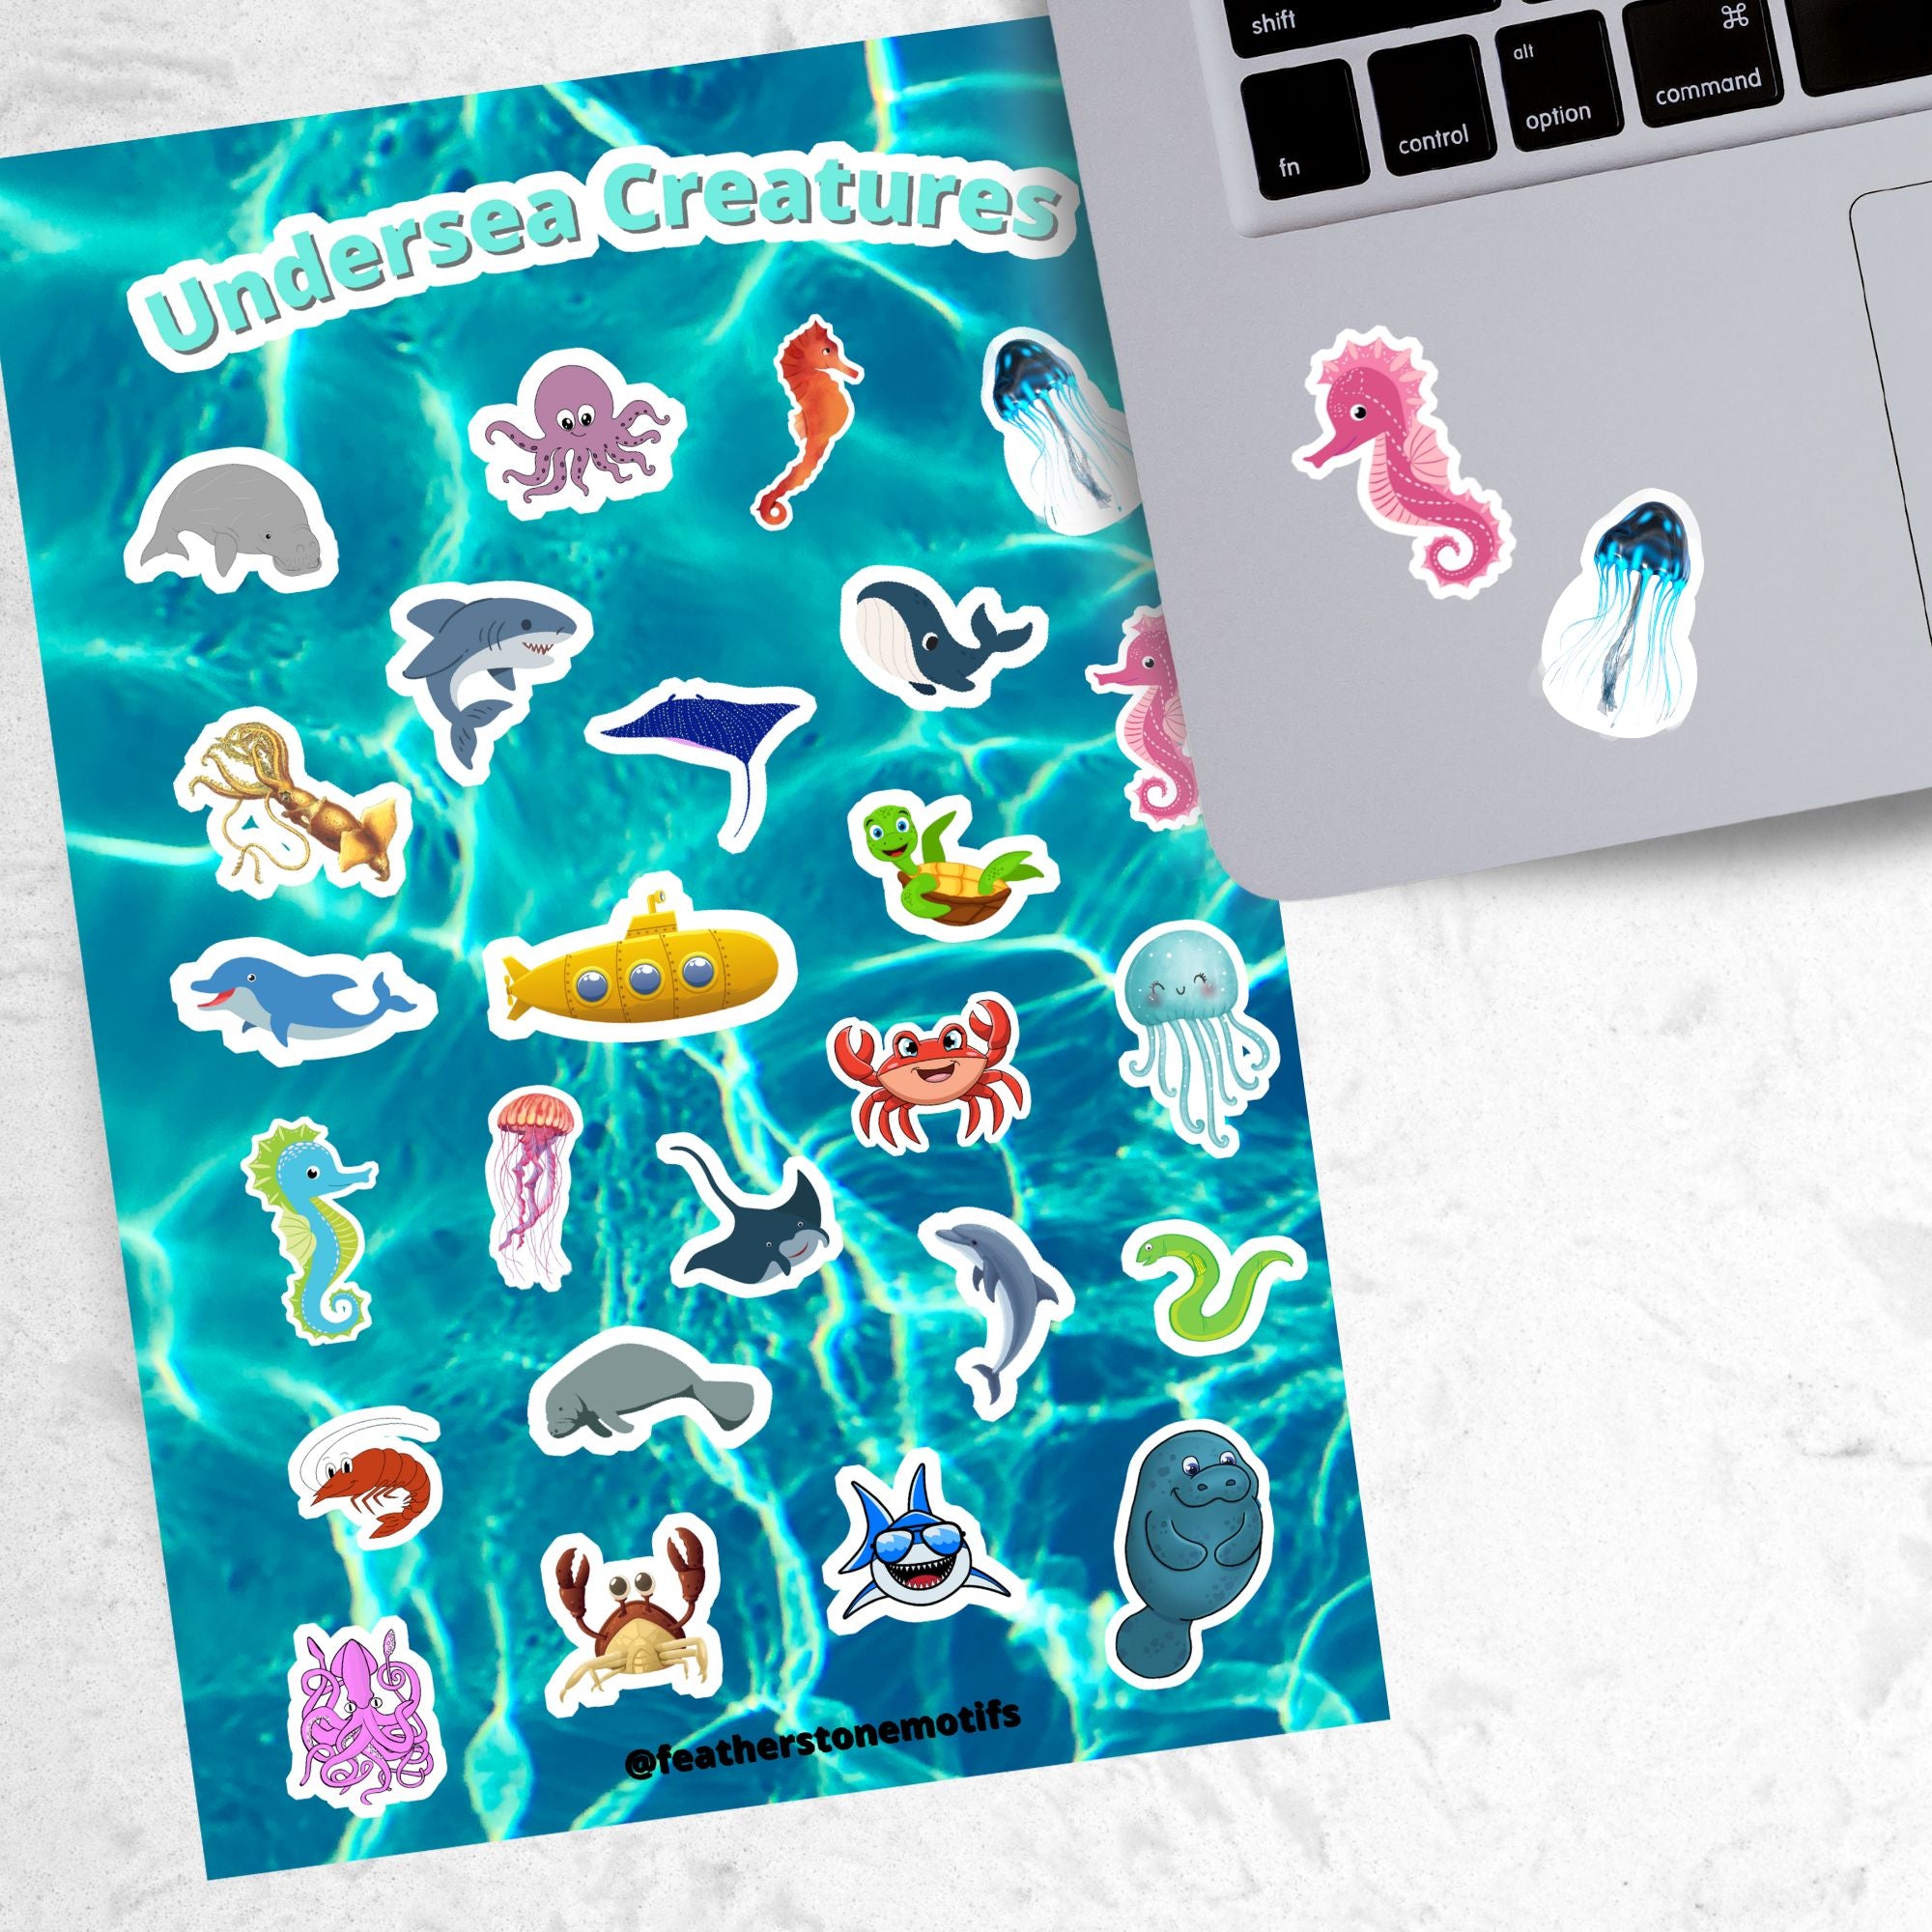 This sticker sheet is filled with fun and cute sticker images of all your favorite undersea creatures! Images include whales, sharks, jellyfish, manatee's, and crabs. There's even a yellow submarine! This image shows a pink seahorse sticker, and a blue jellyfish sticker, applied below the keyboard.